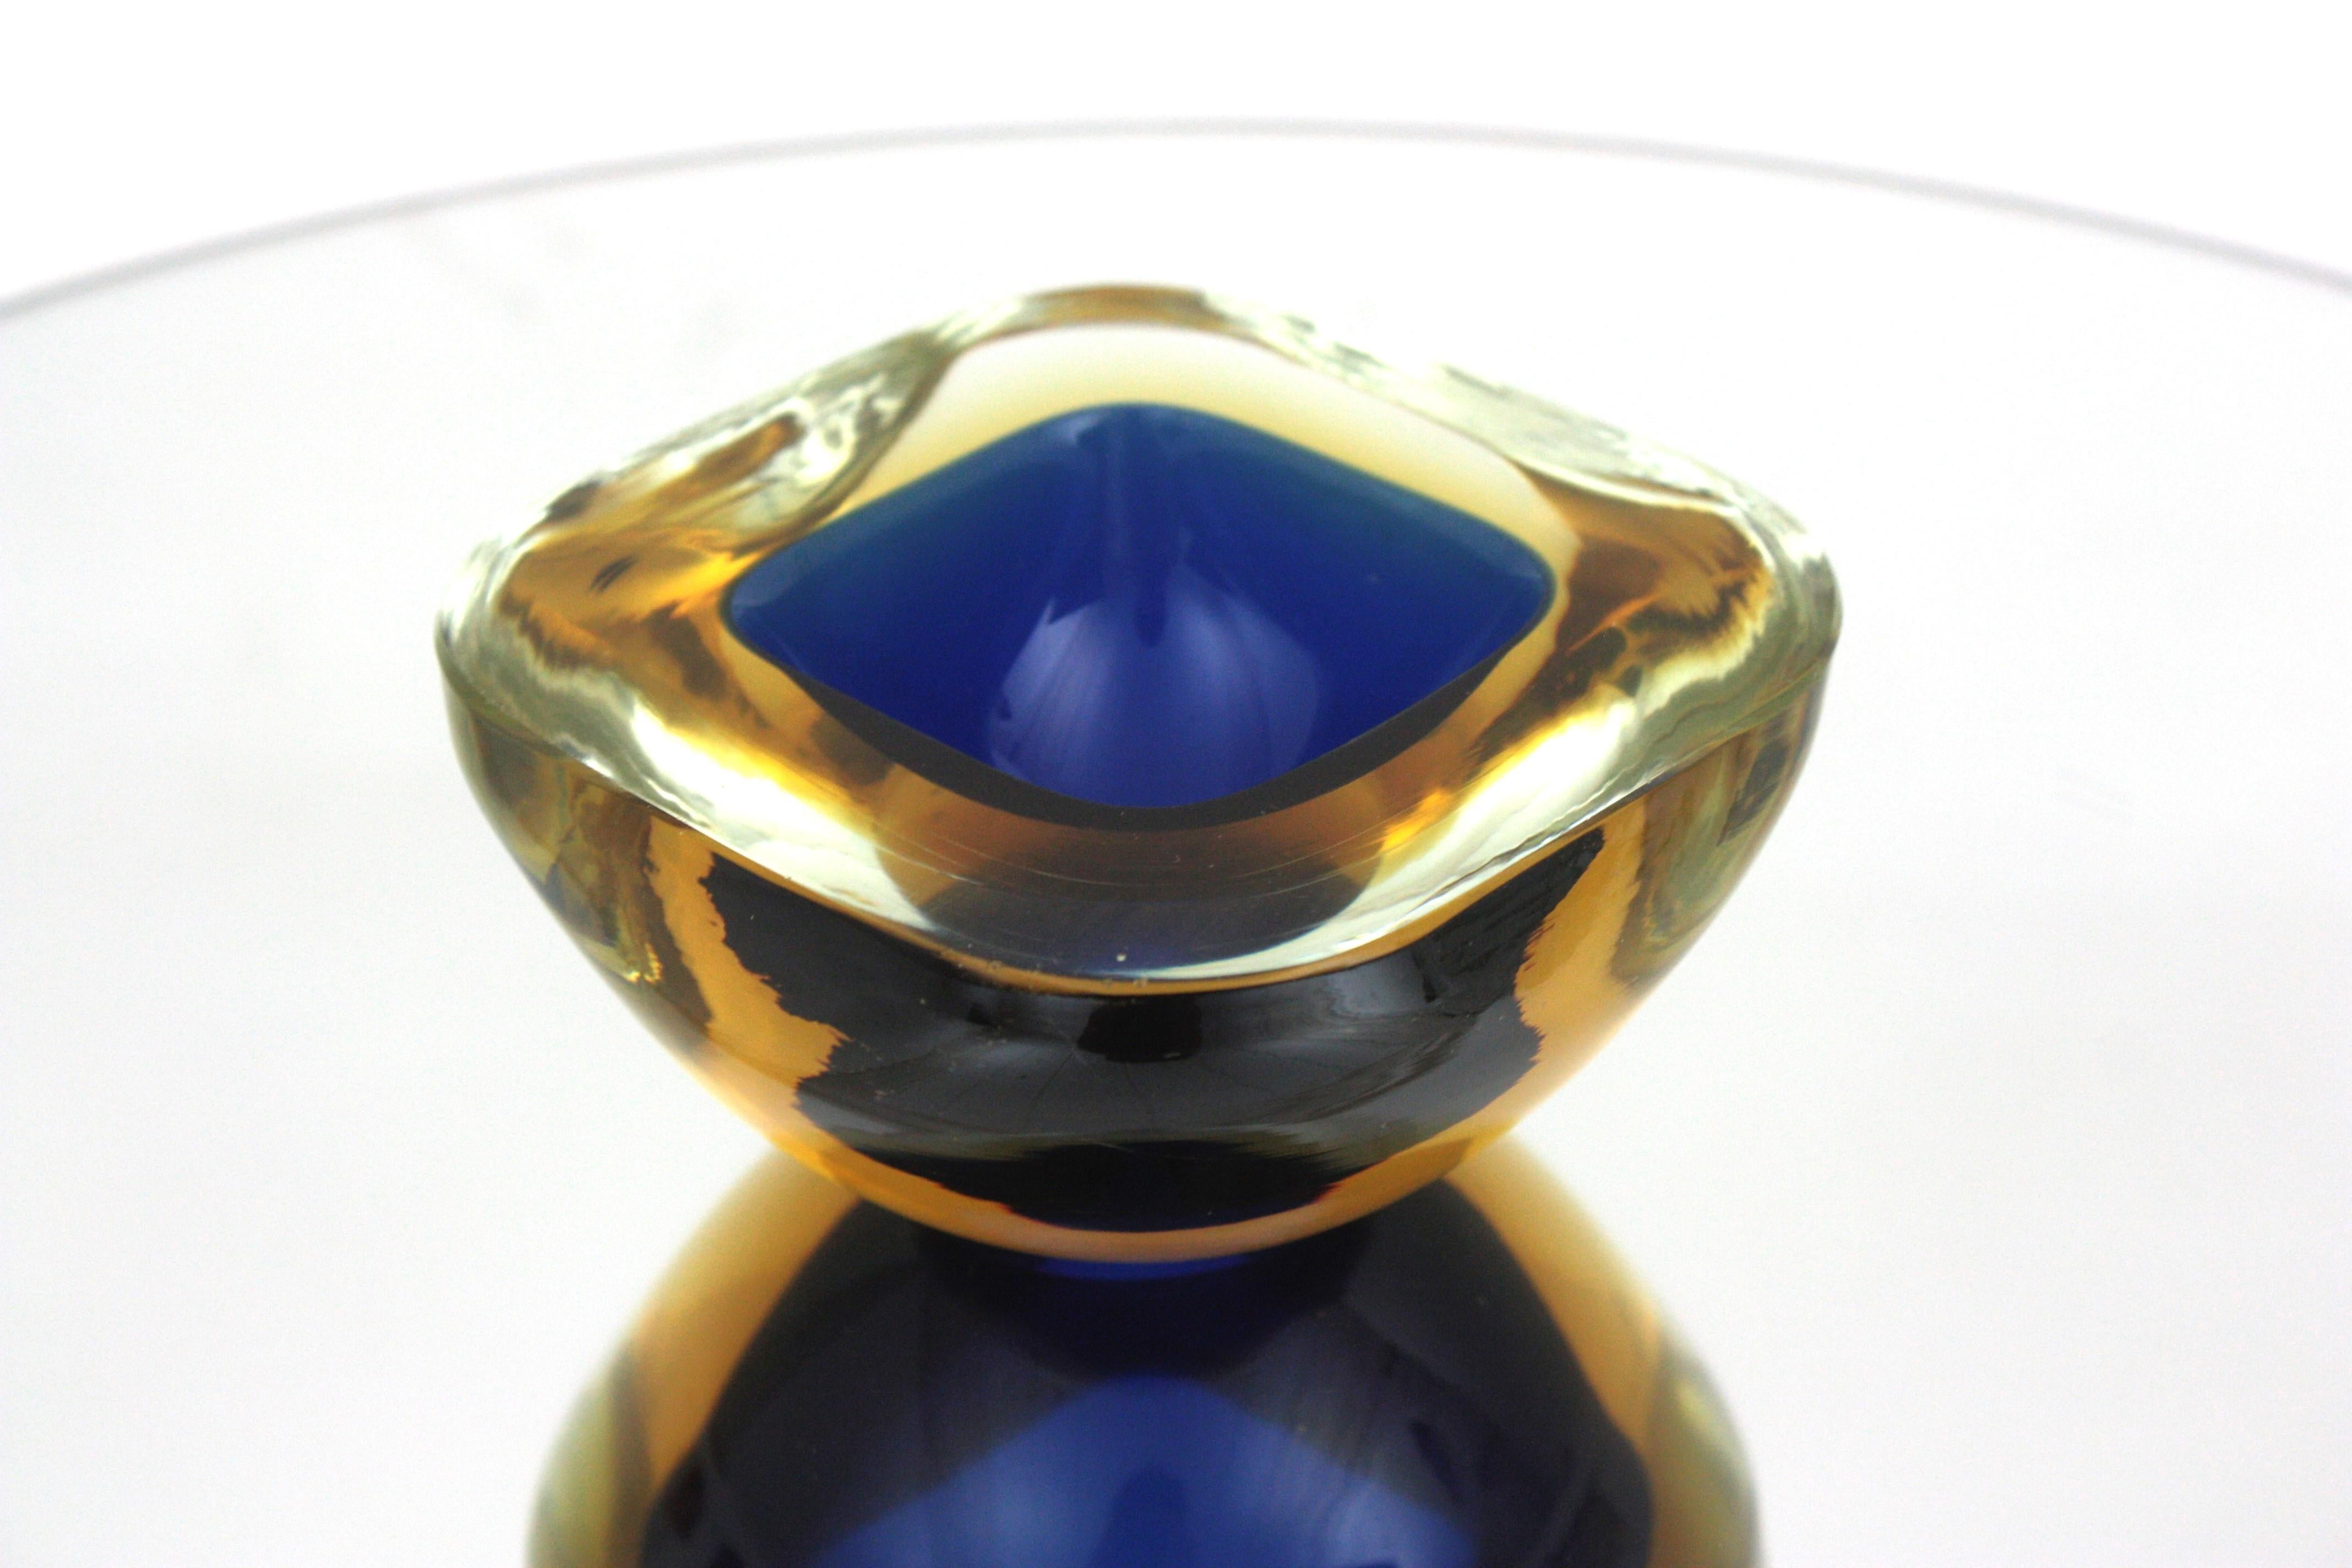 Italian Murano art glass square shaped geode bowl attributed to Flavio Poli for Seguso Vetri d'Arte. Italy, 1950s.
Beautiful hand blown Murano glass piece combining amber yellow, blue and clear glass with Sommerso technique. 
This decorative bowl